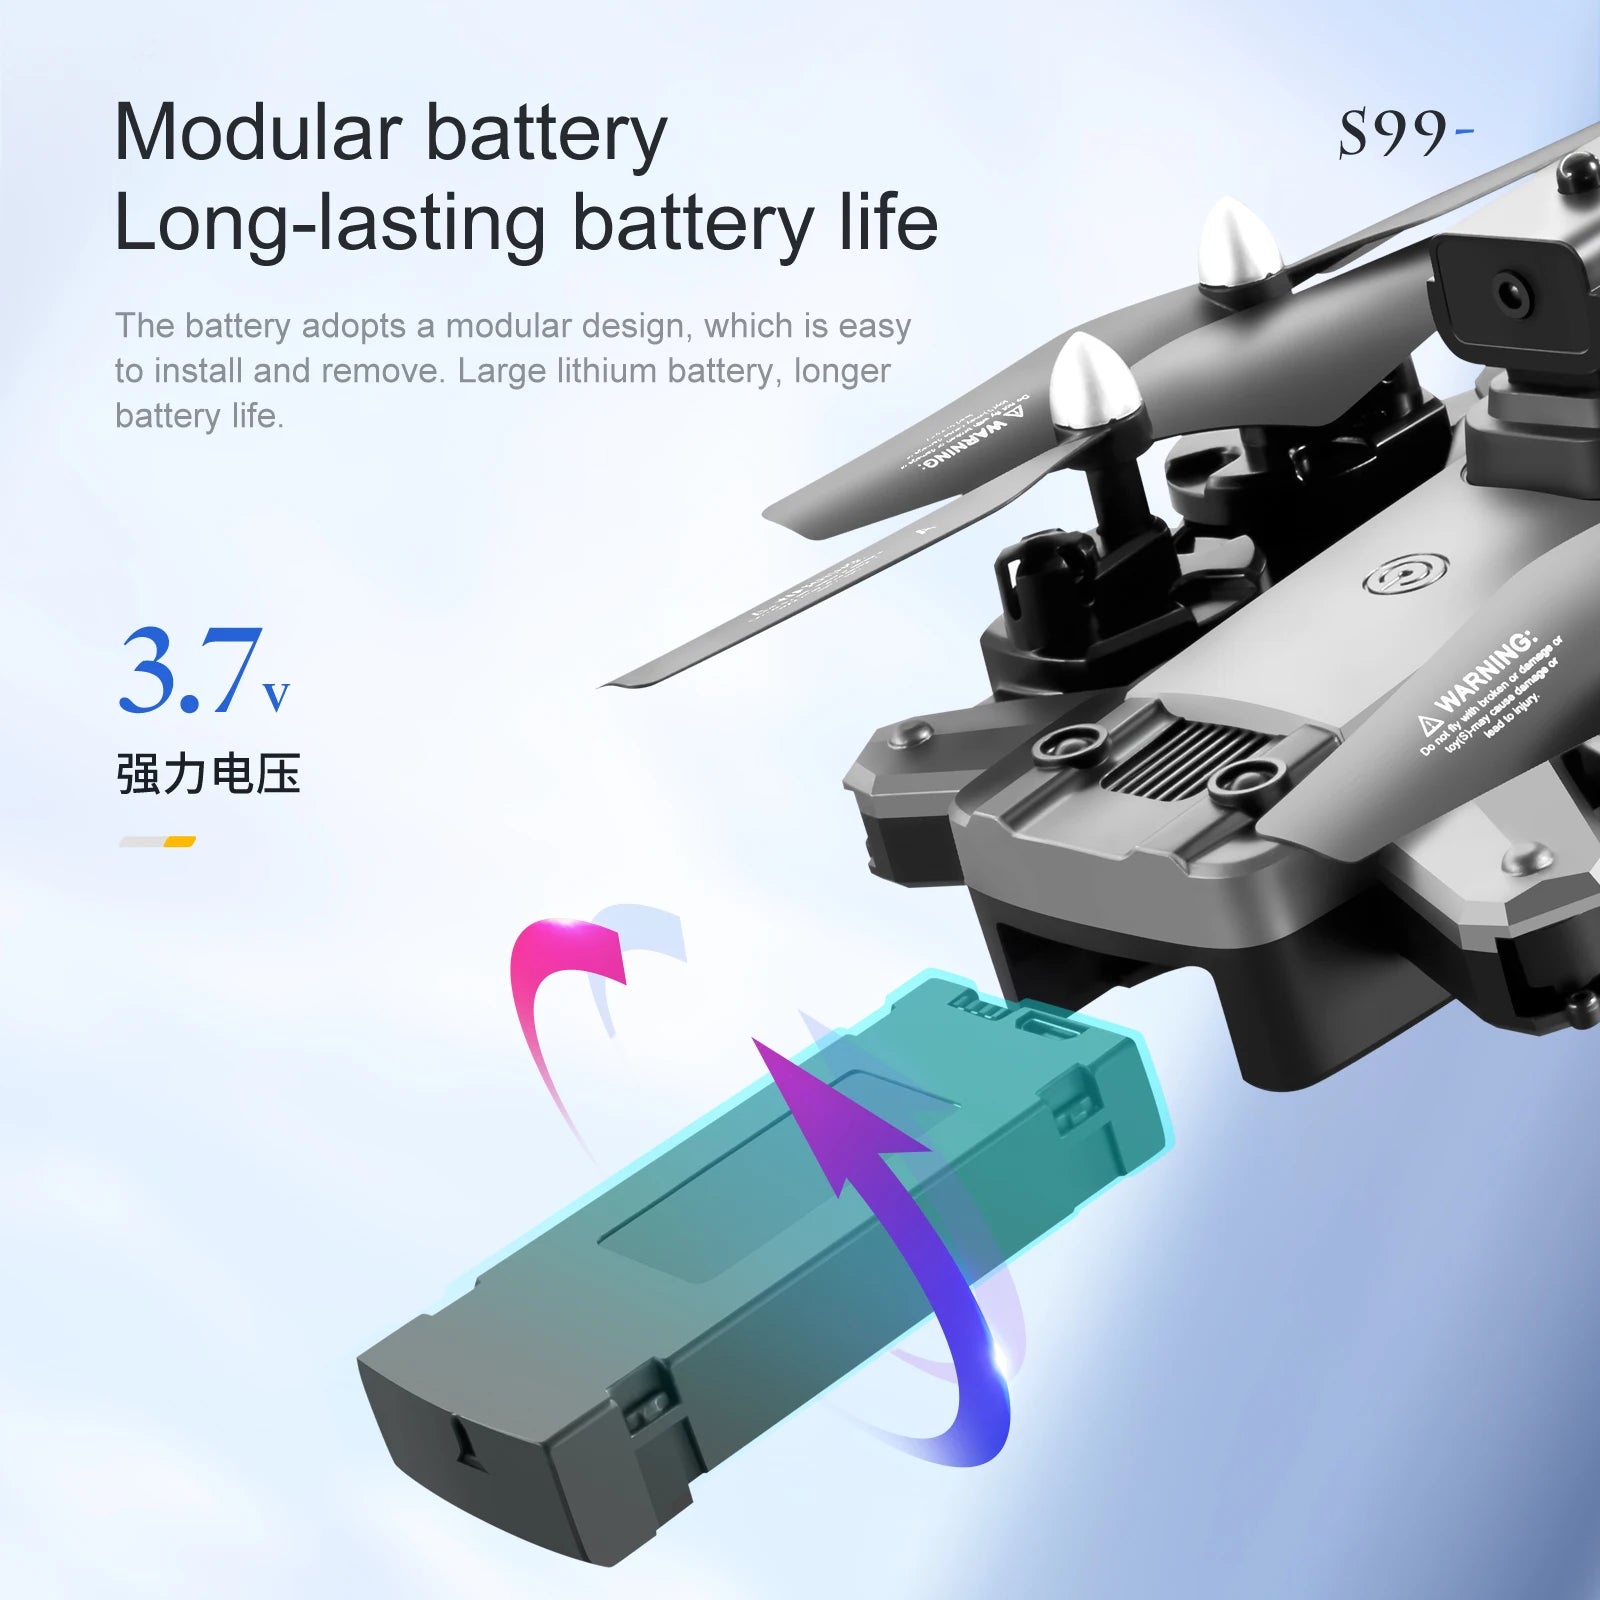 S99 Drone, modular battery s99 - long-lasting battery life the battery